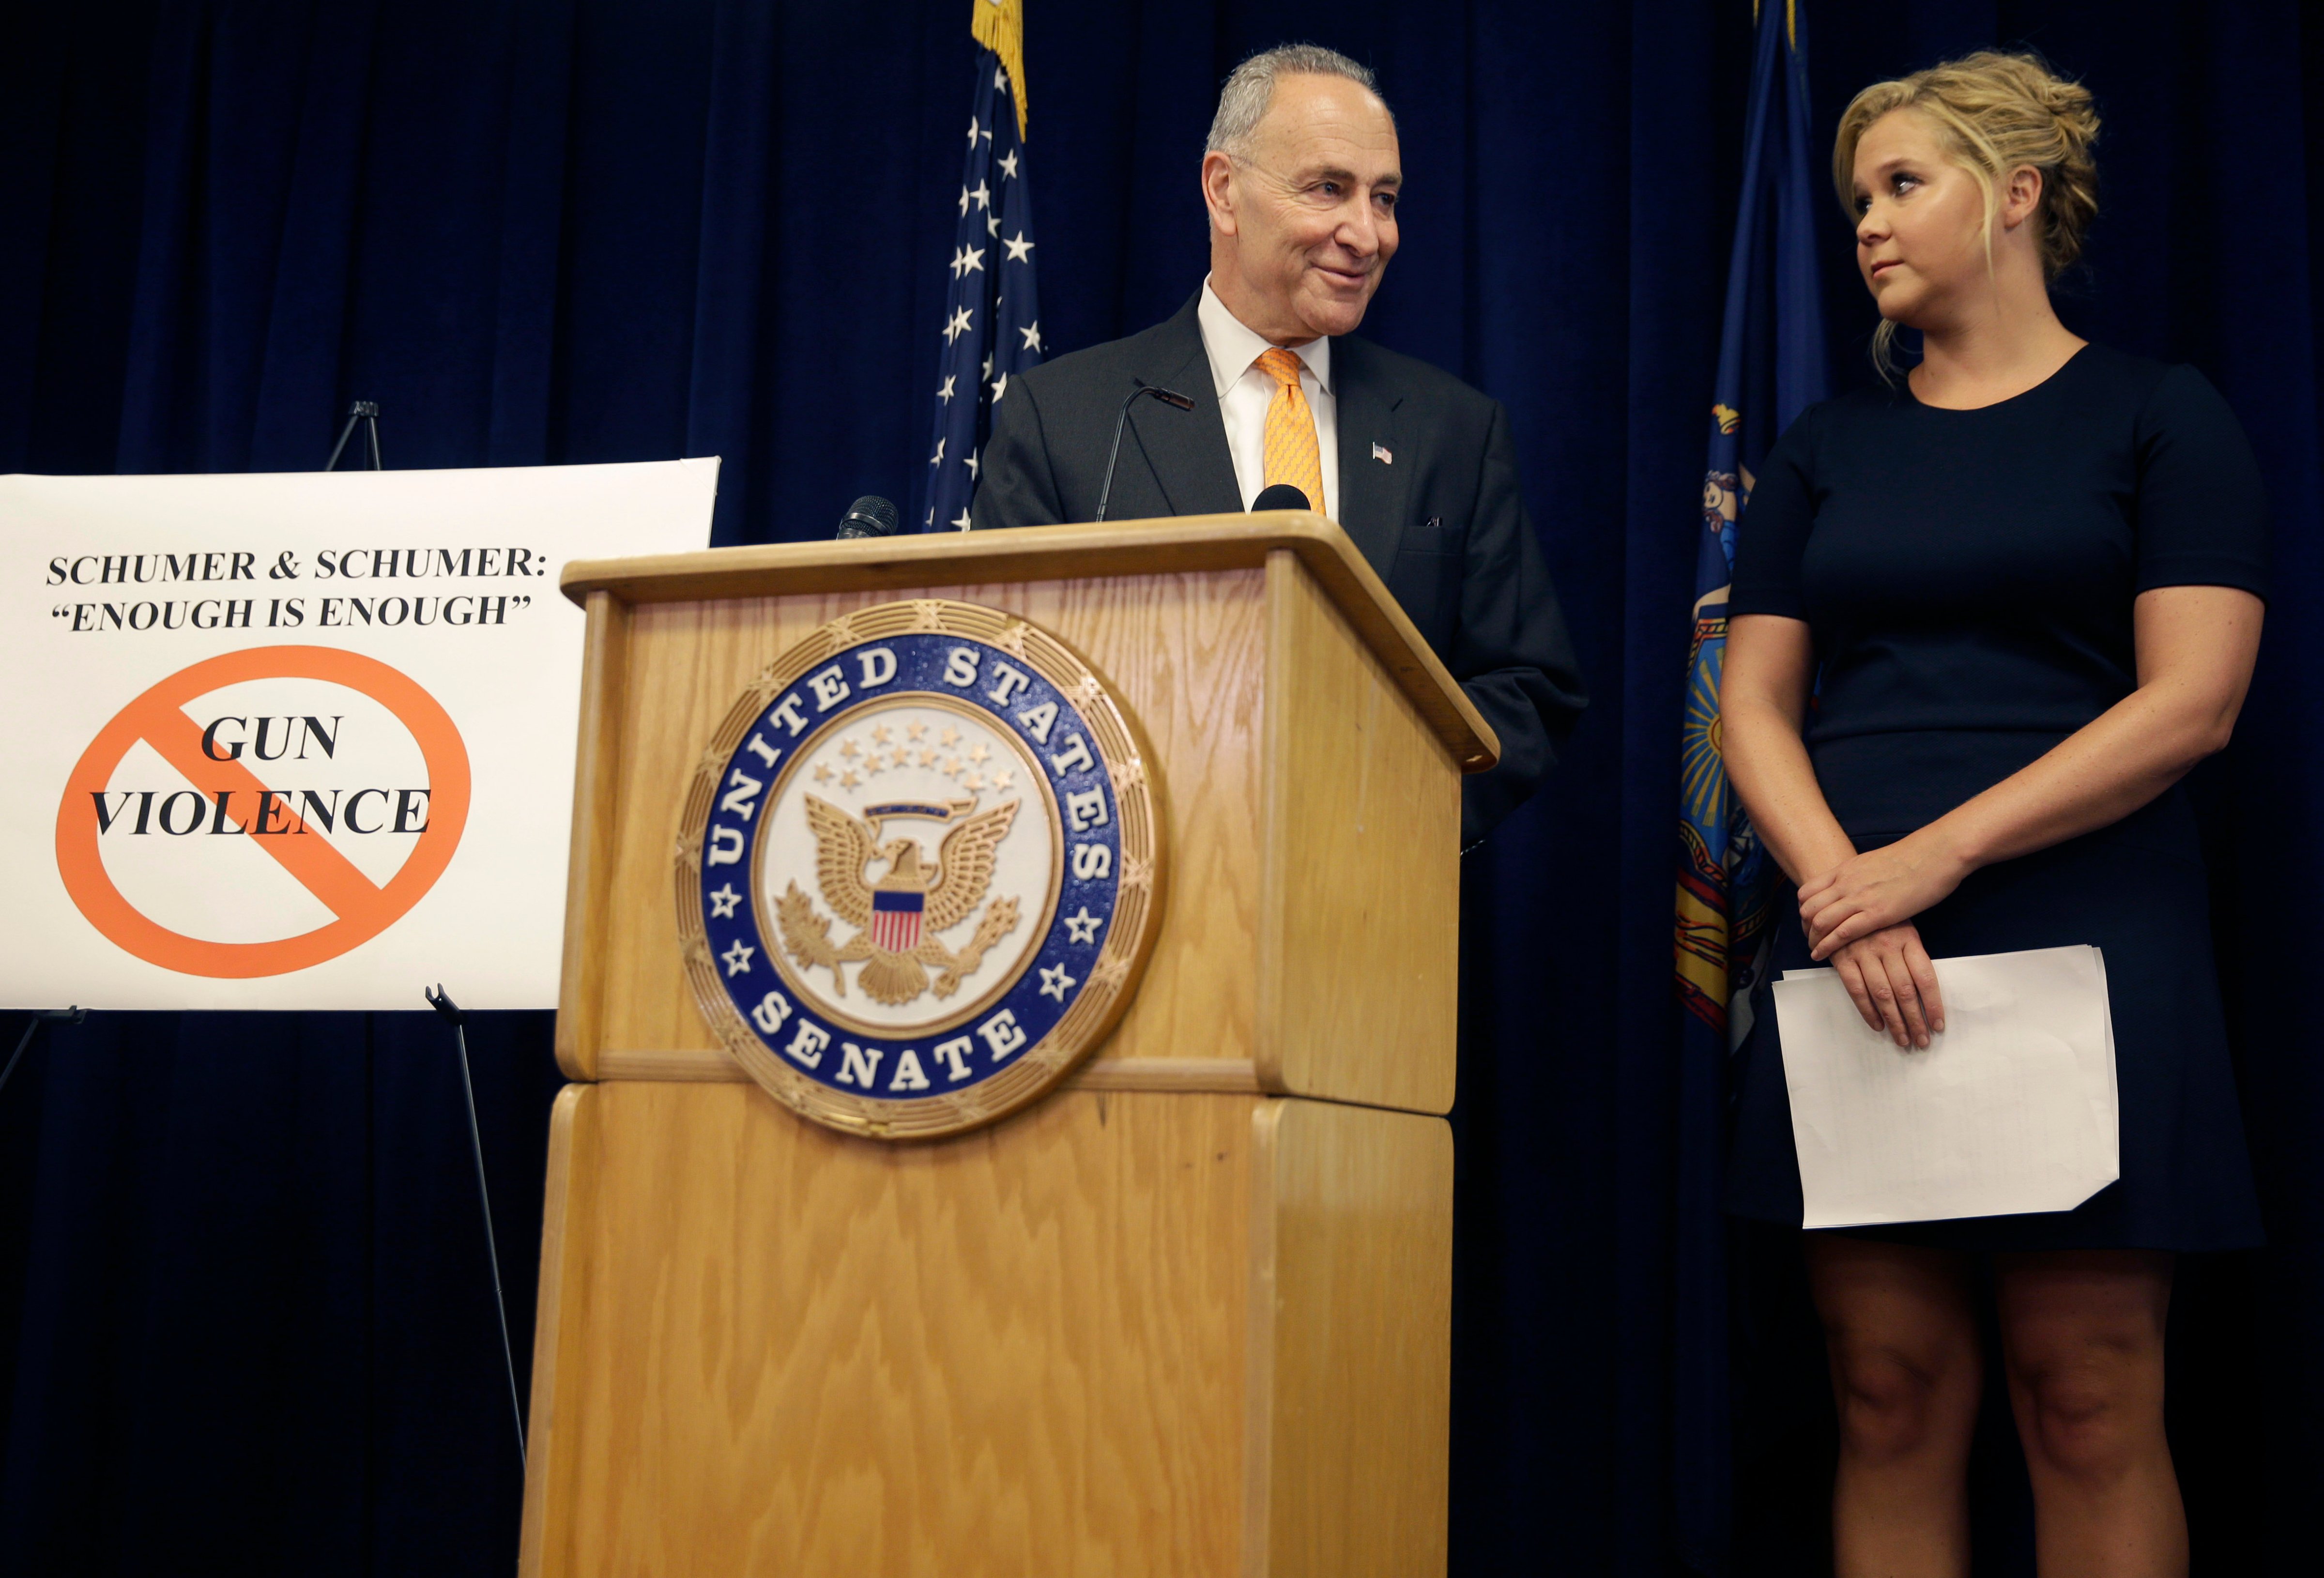 New York Sen. Chuck Schumer and his cousin Amy Schumer spoke at a news conference about gun control regulations in New York on Aug. 3, 2015. (Seth Wenig—AP)